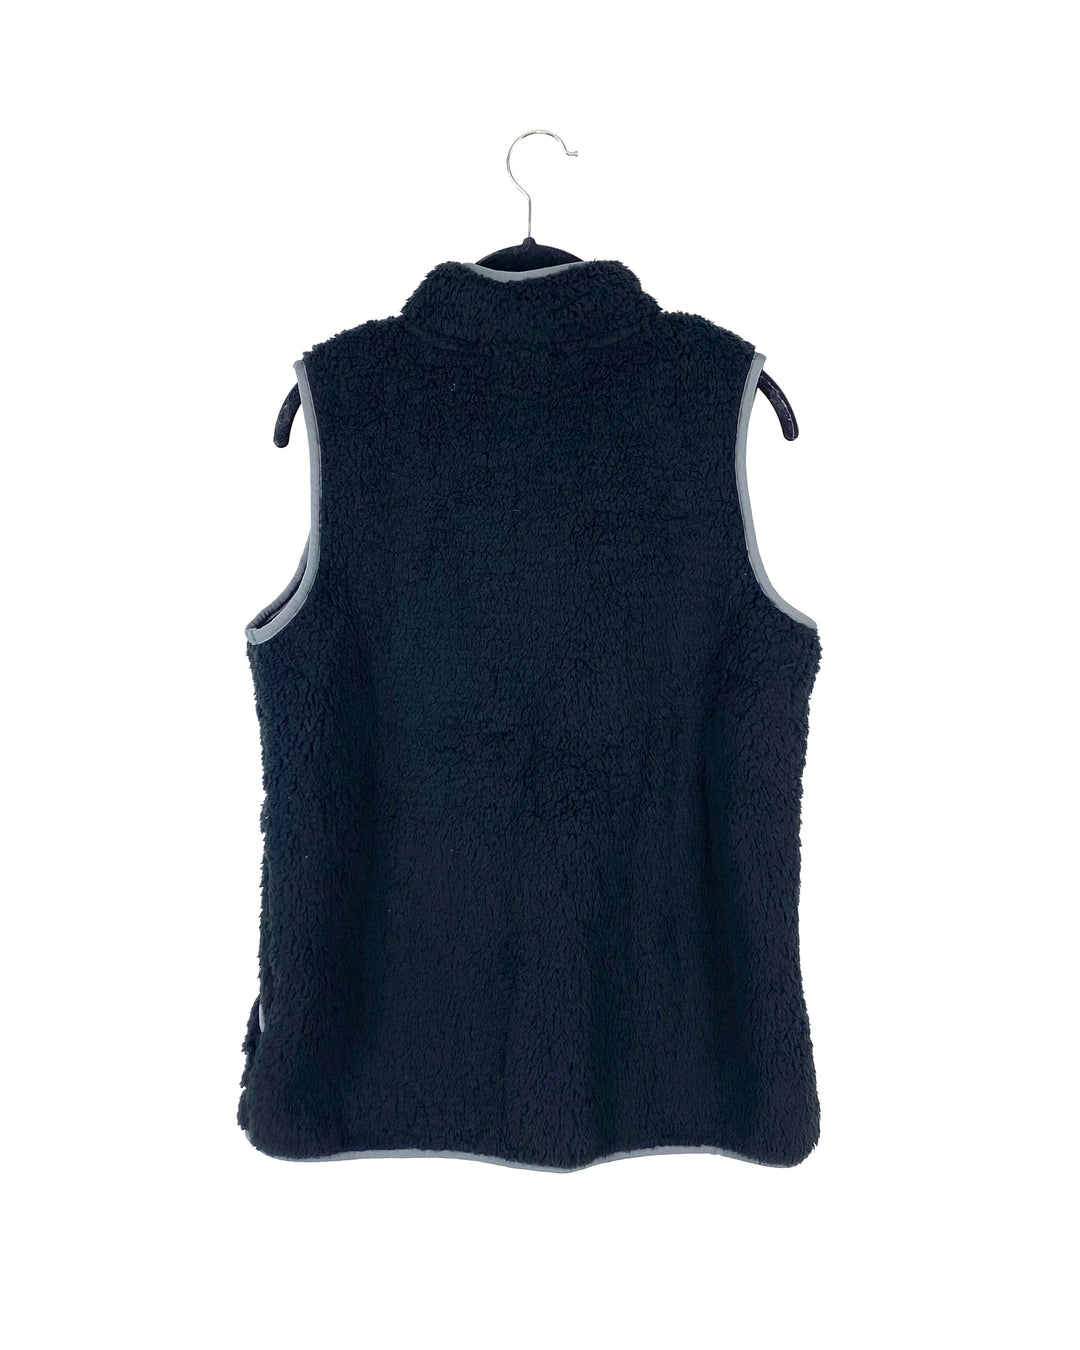 Black Sherpa Vest - Extra Small and Small